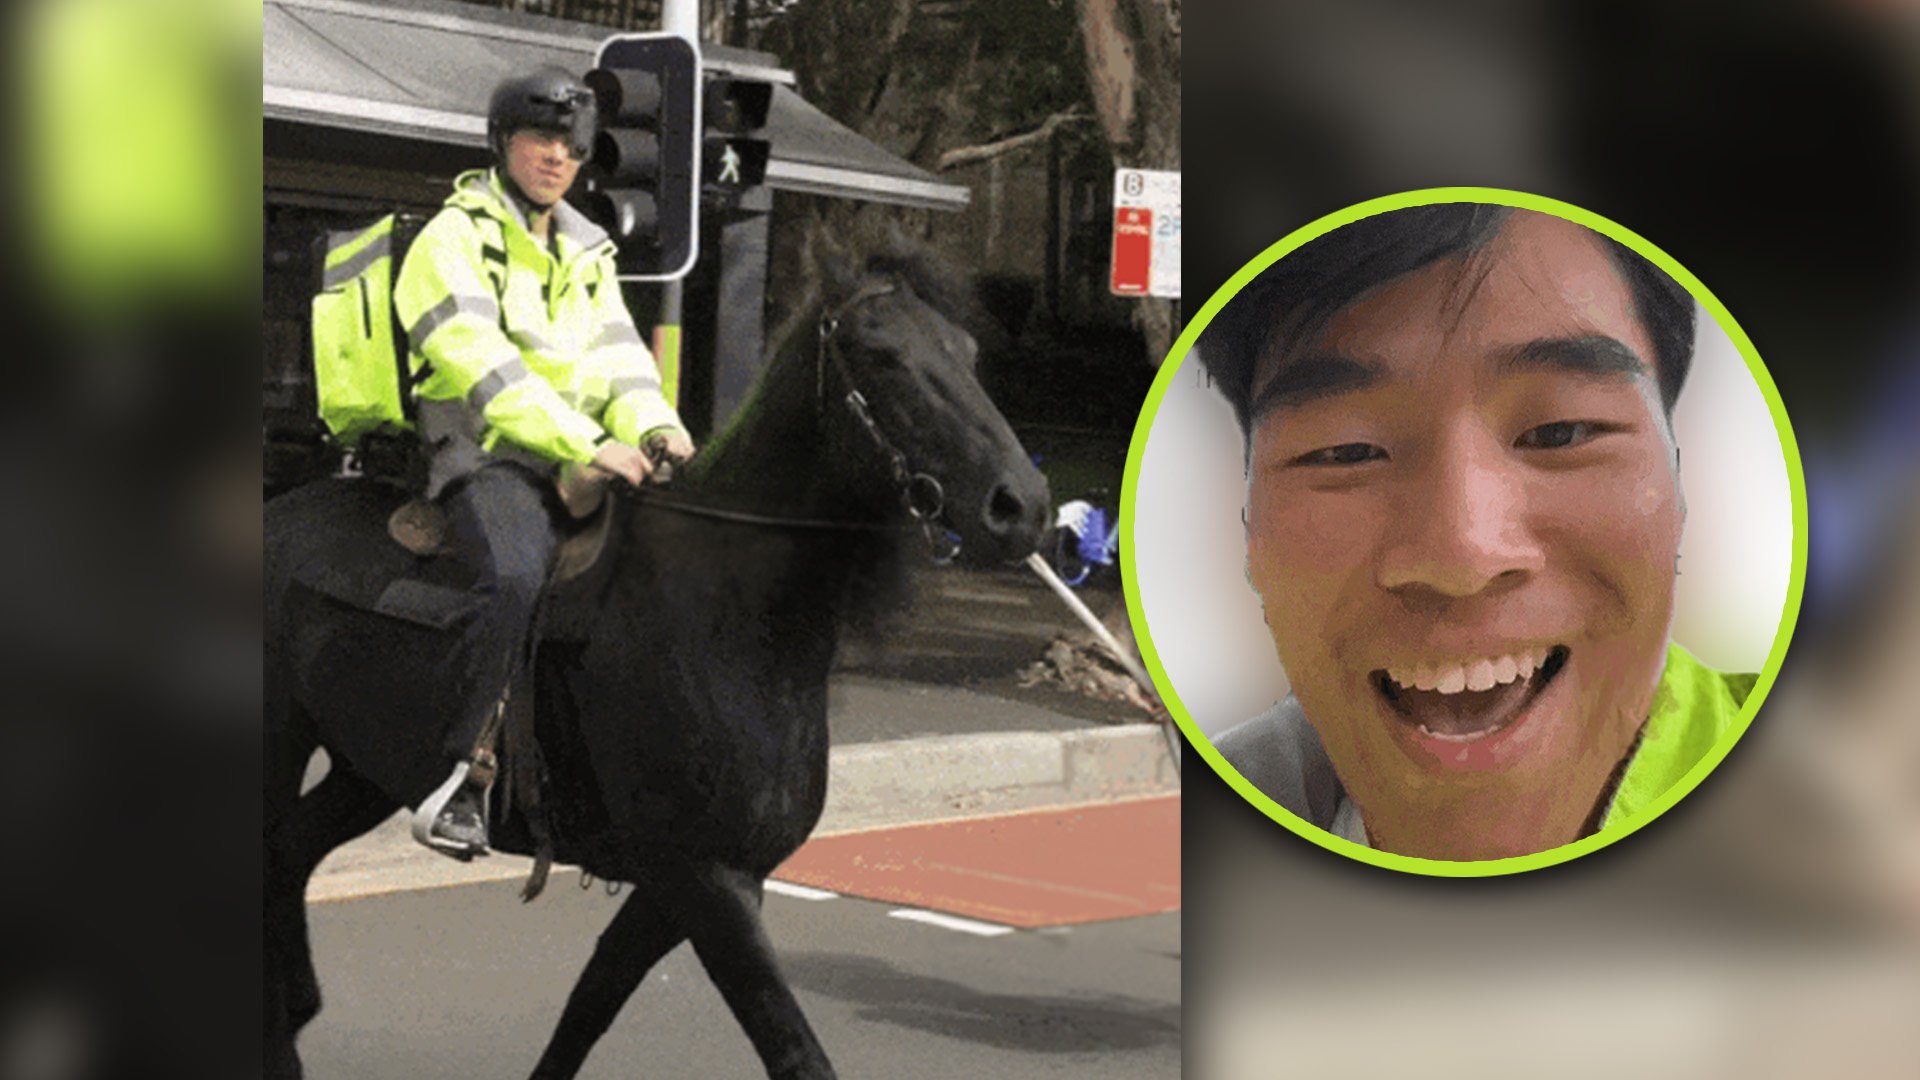 A Chinese-Australian man has stirred controversy after video emerged of him making food deliveries on a horse in the suburbs of Sydney. Photo: SCMP composite/TikTok